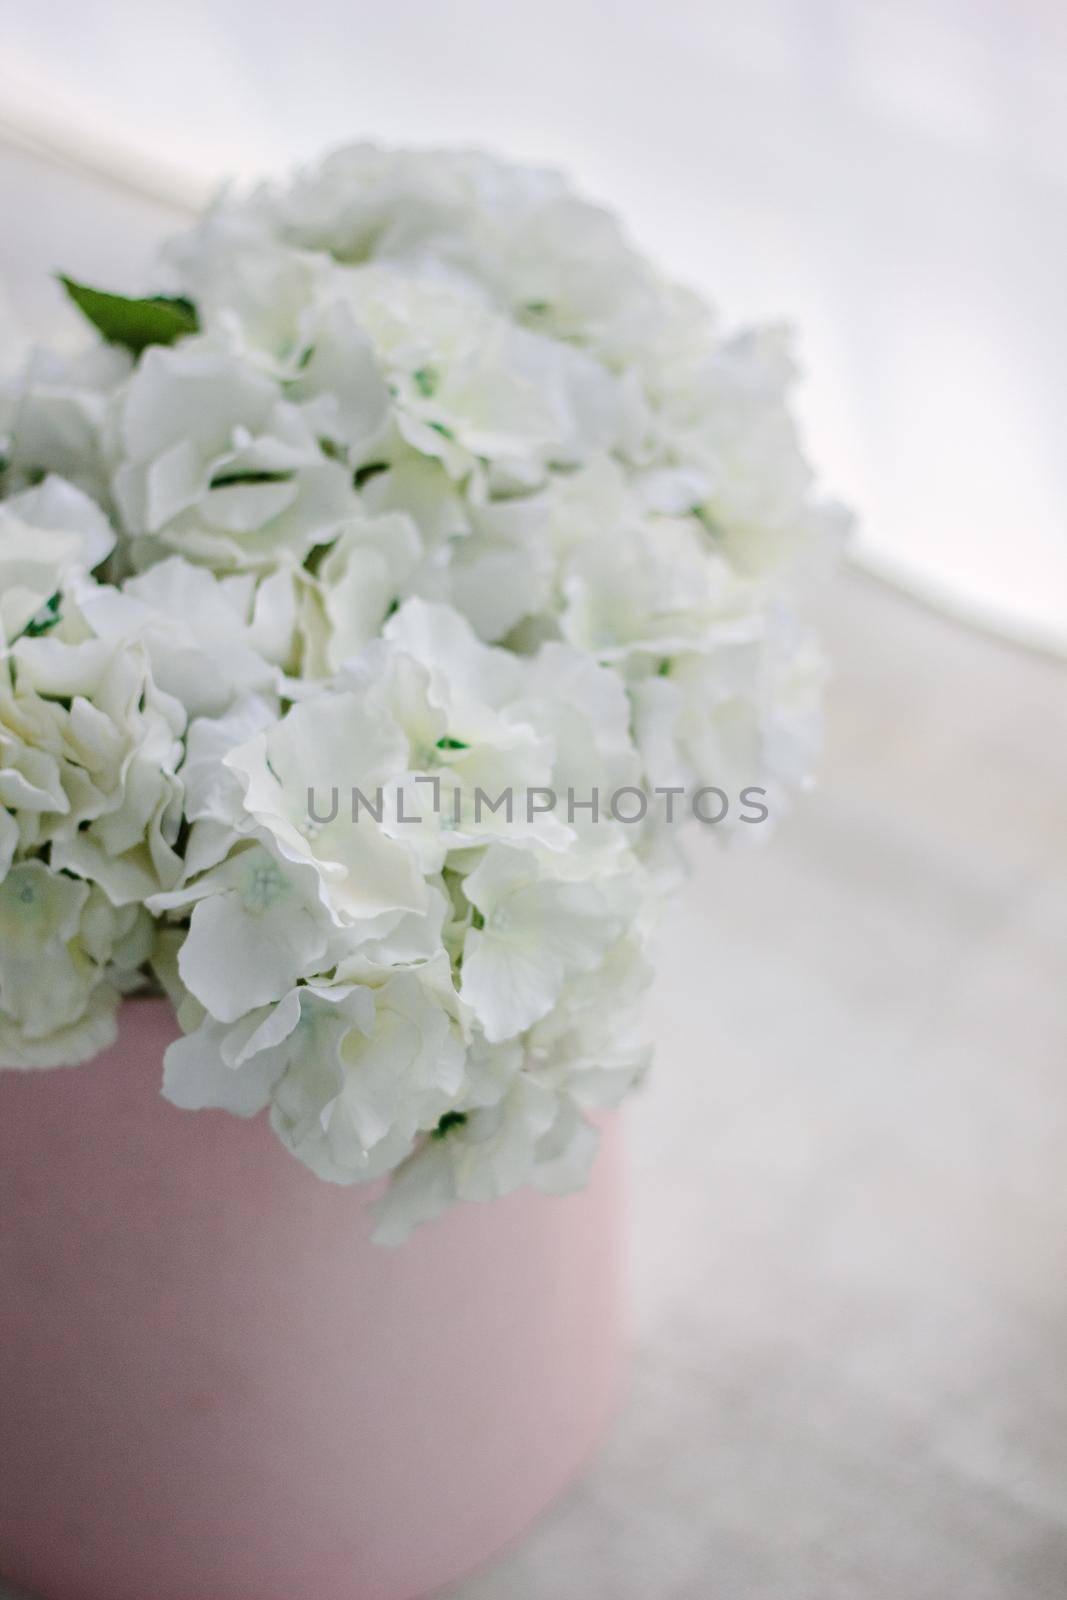 White flower bouquet over a table